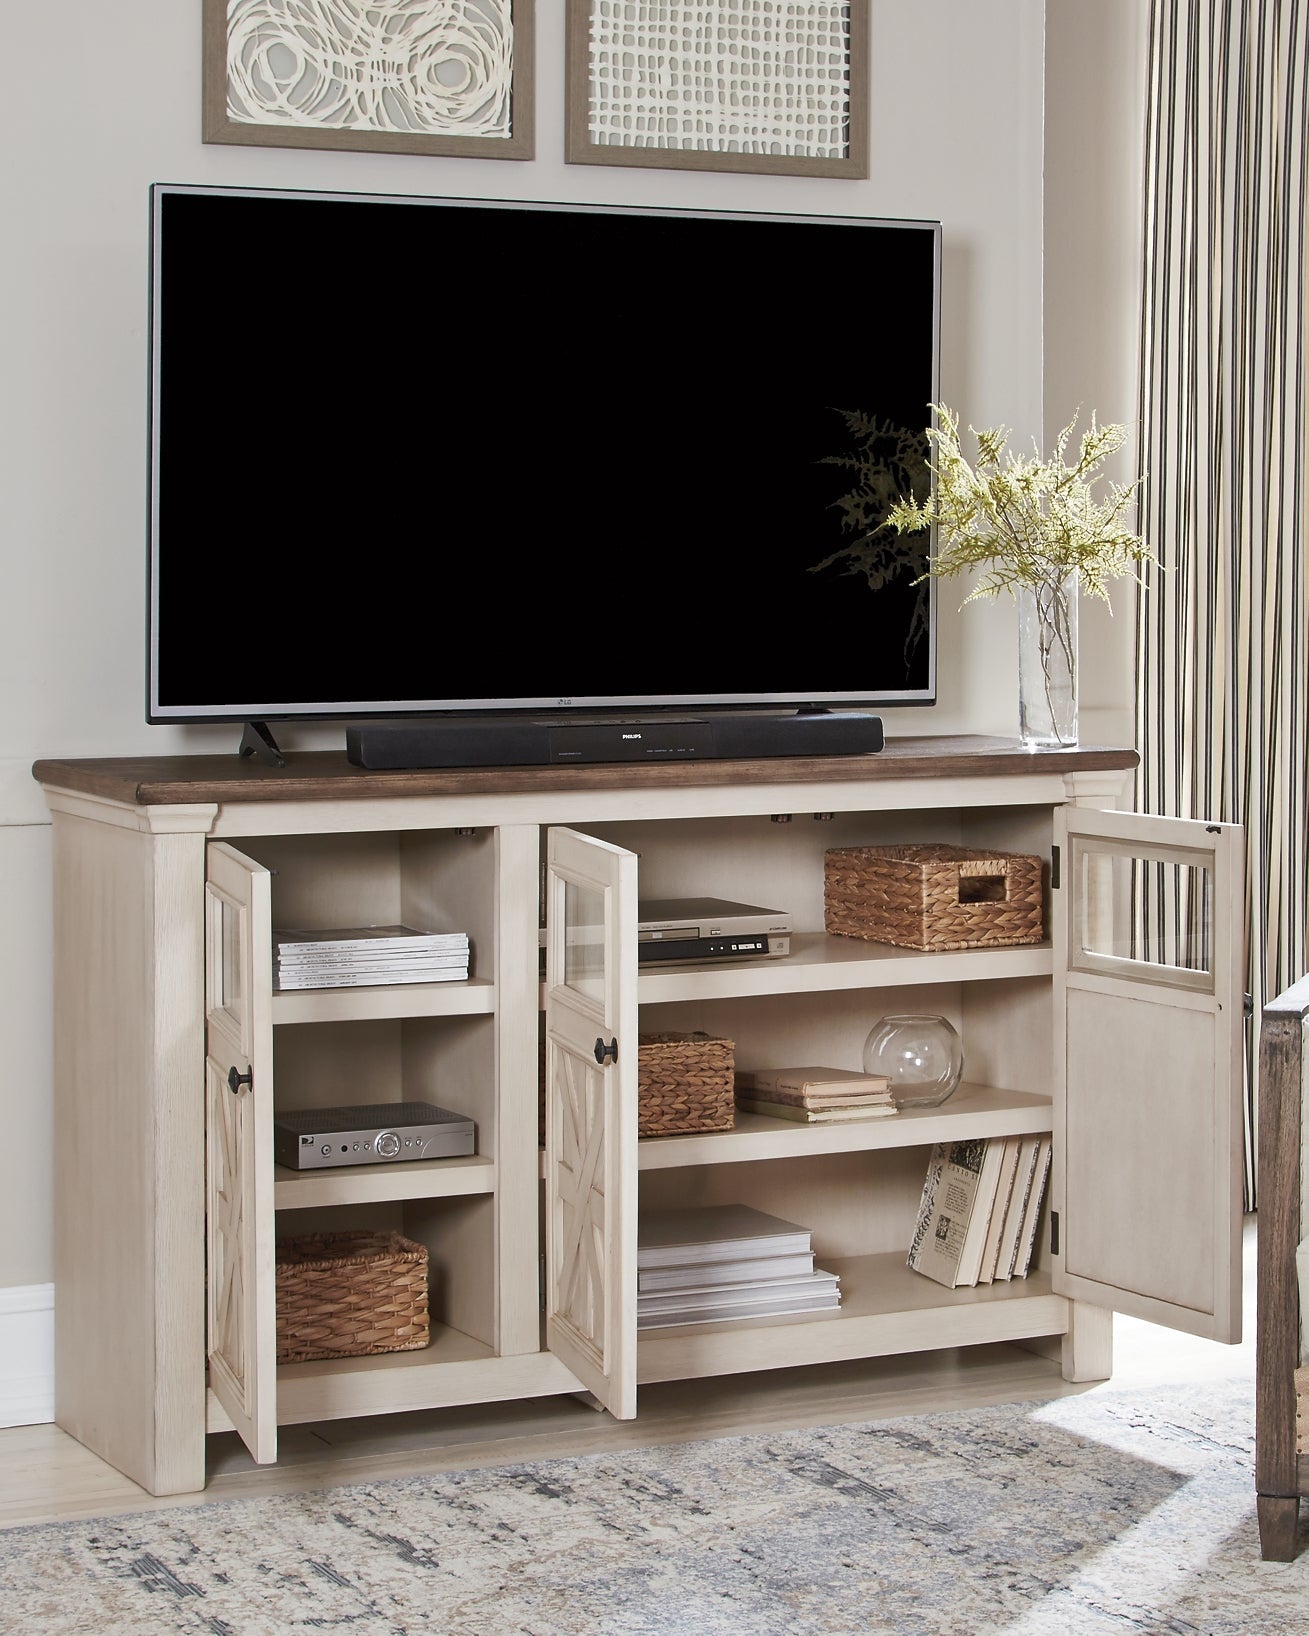 Bolanburg Large TV Stand at Walker Mattress and Furniture Locations in Cedar Park and Belton TX.